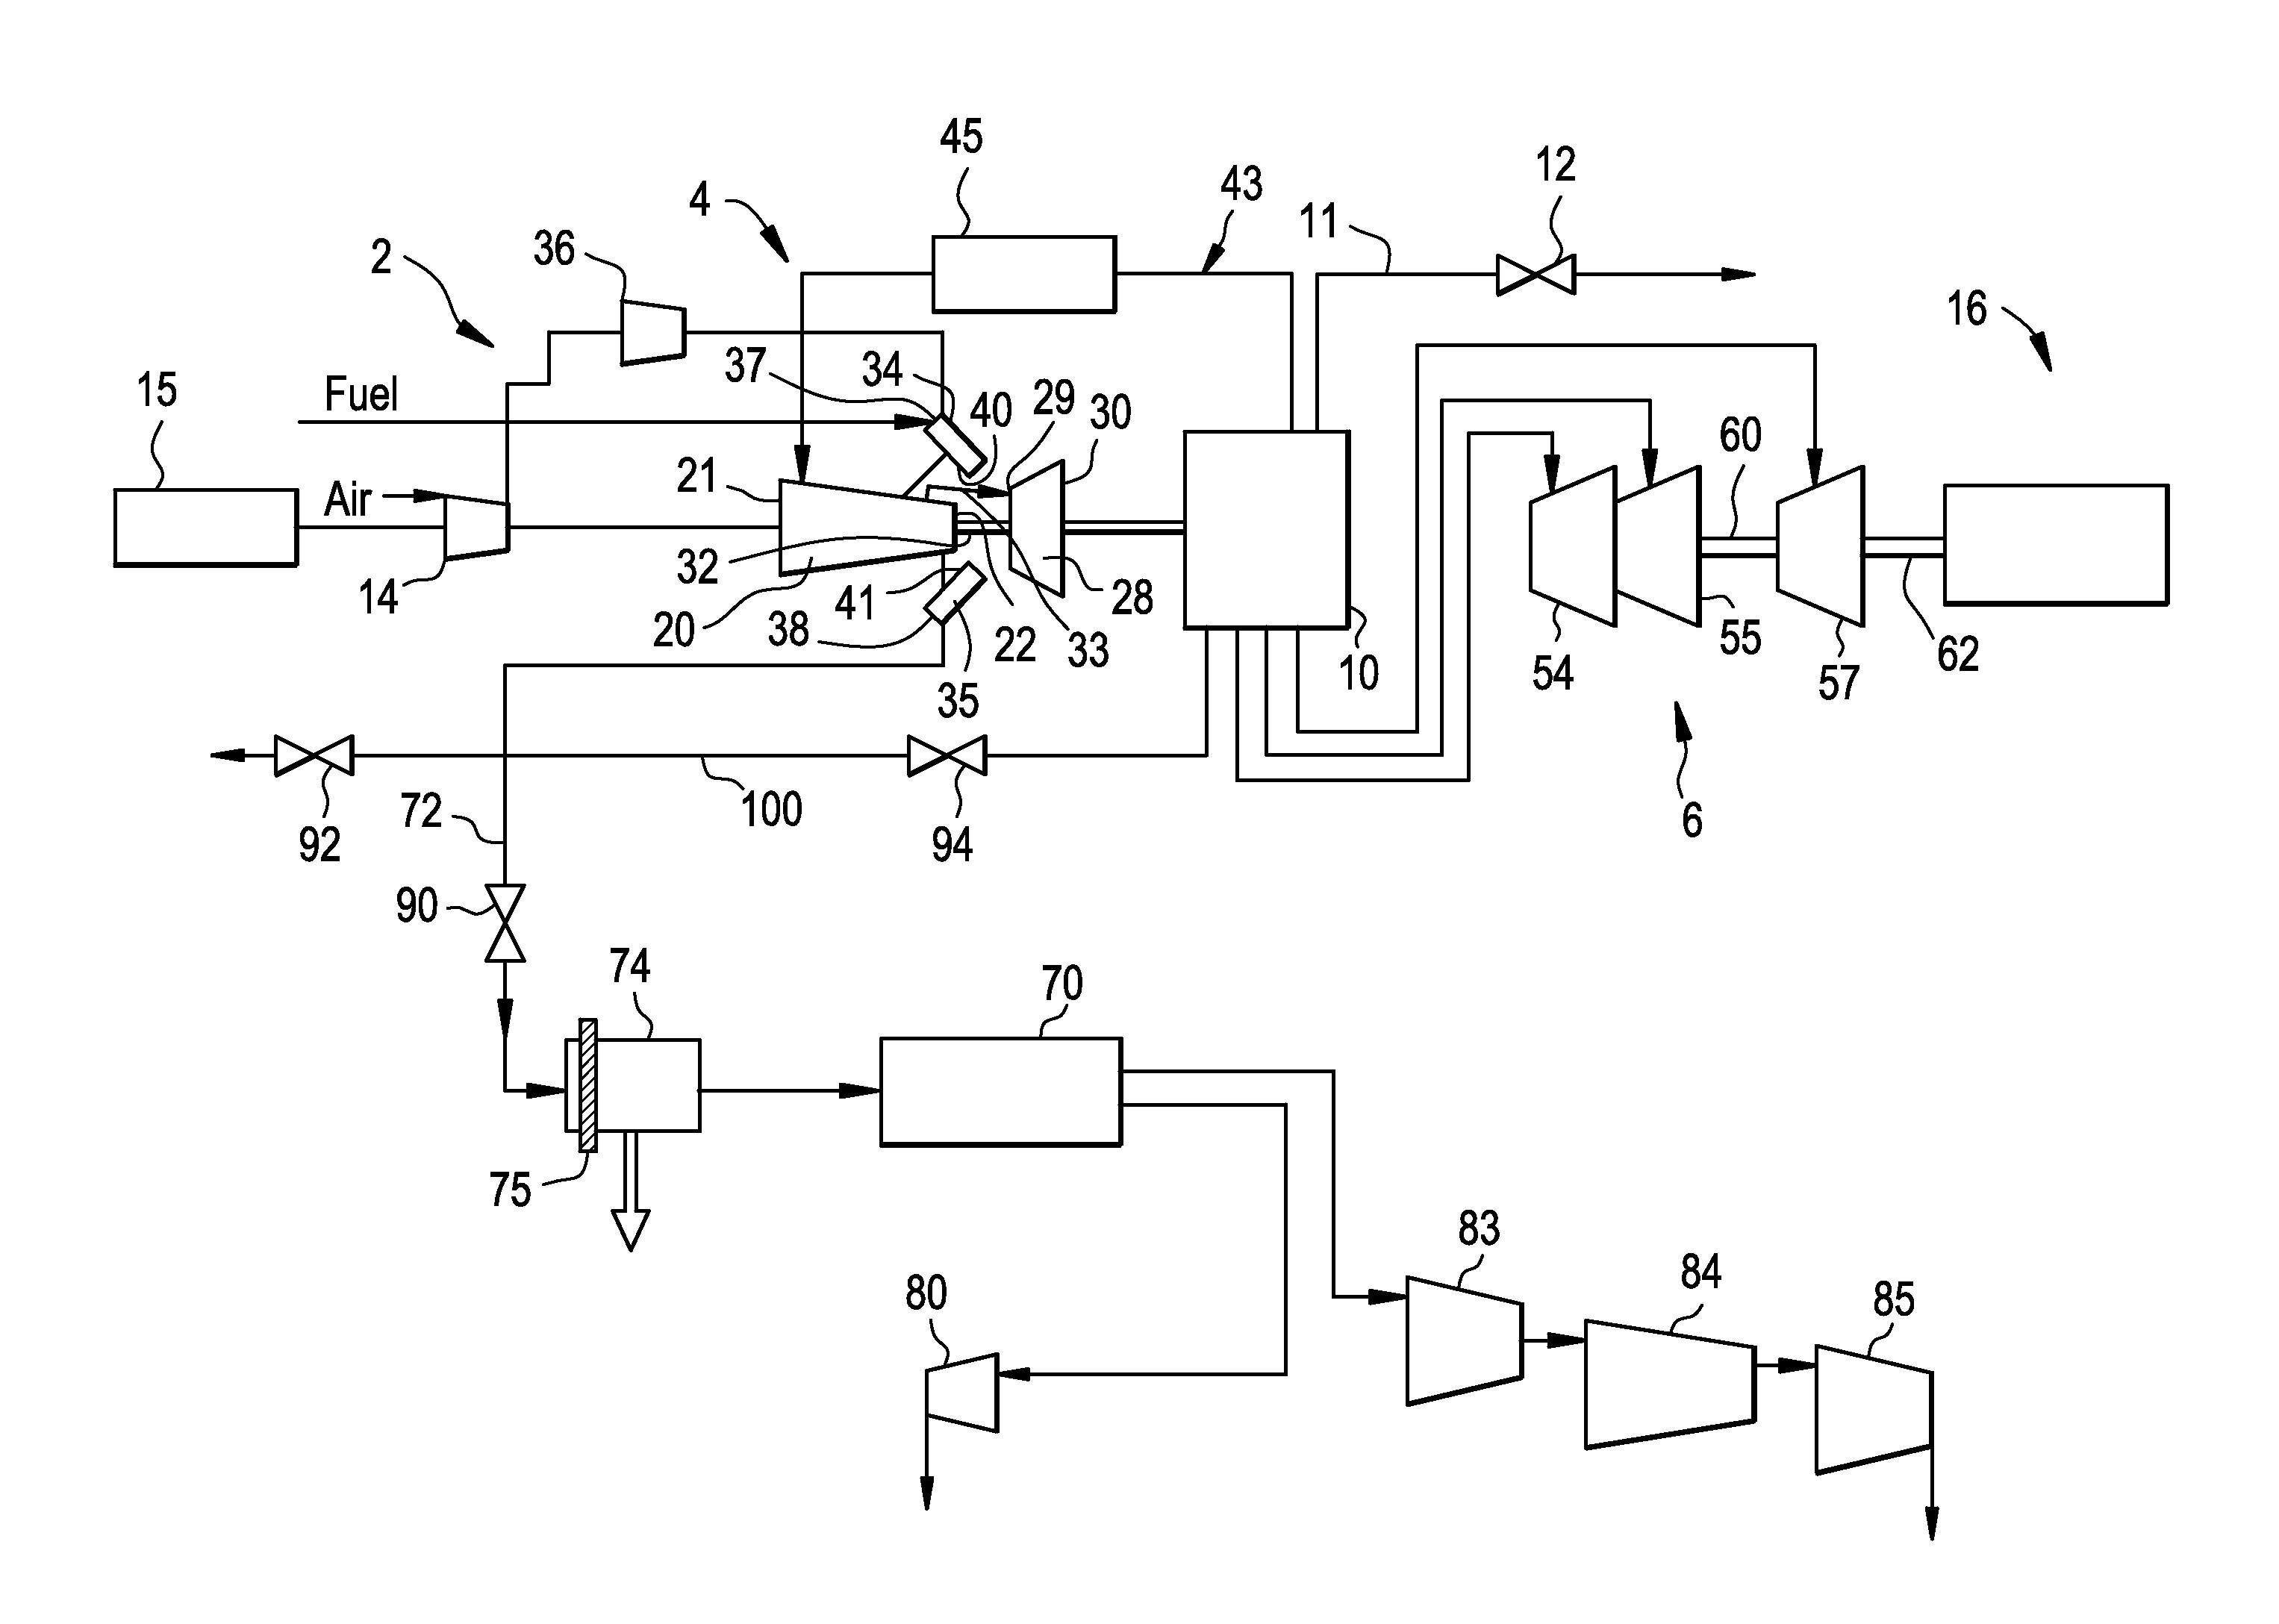 Combined cycle power plant including a carbon dioxide collection system